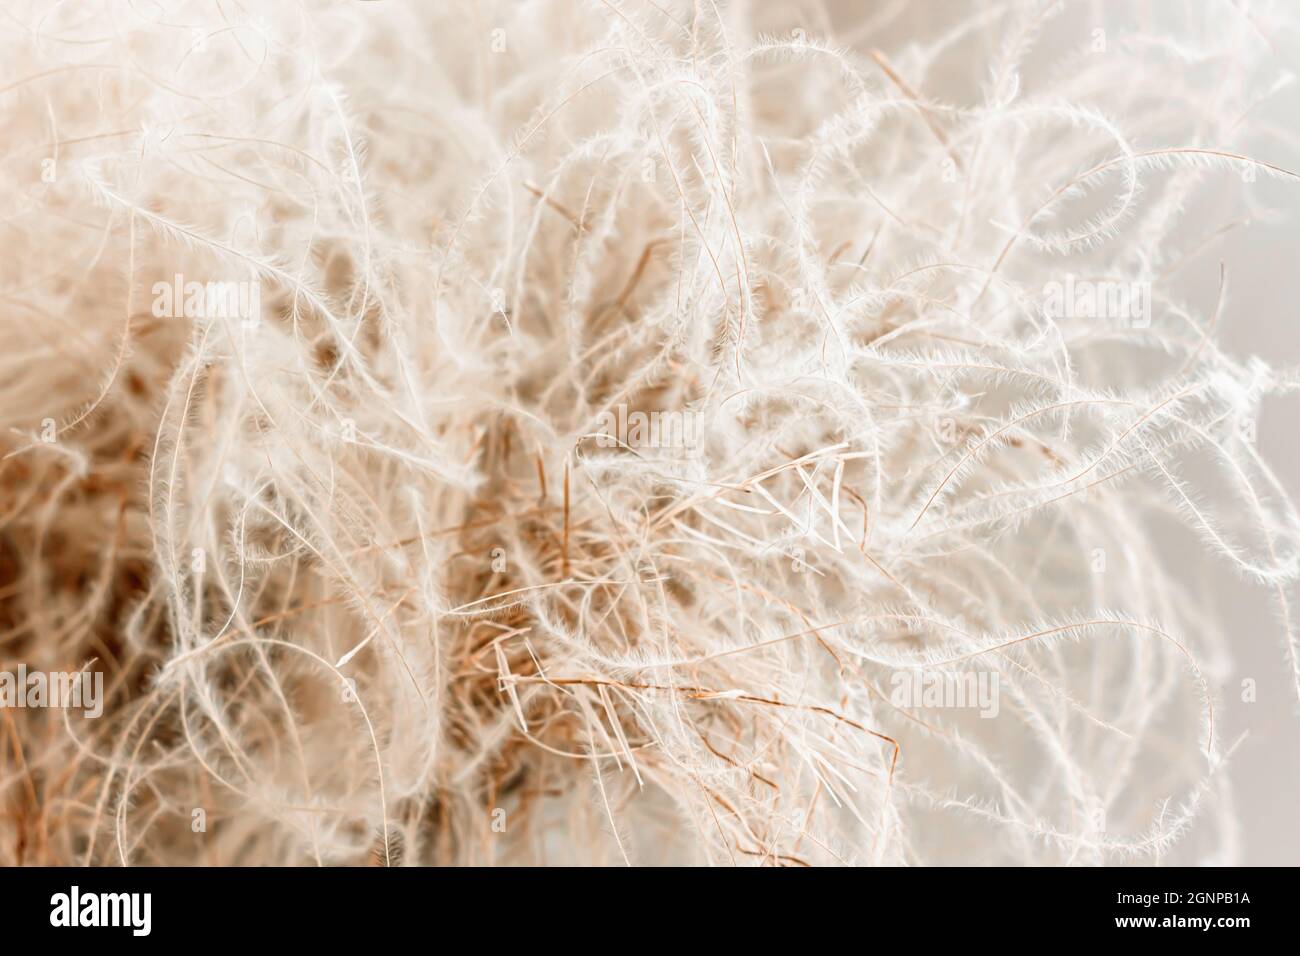 Abstract feather grass closeup for wabi-sabi interior design. Natural fluffy decoration for cozy minimalist home, earth beige and sandy tones backdrop Stock Photo